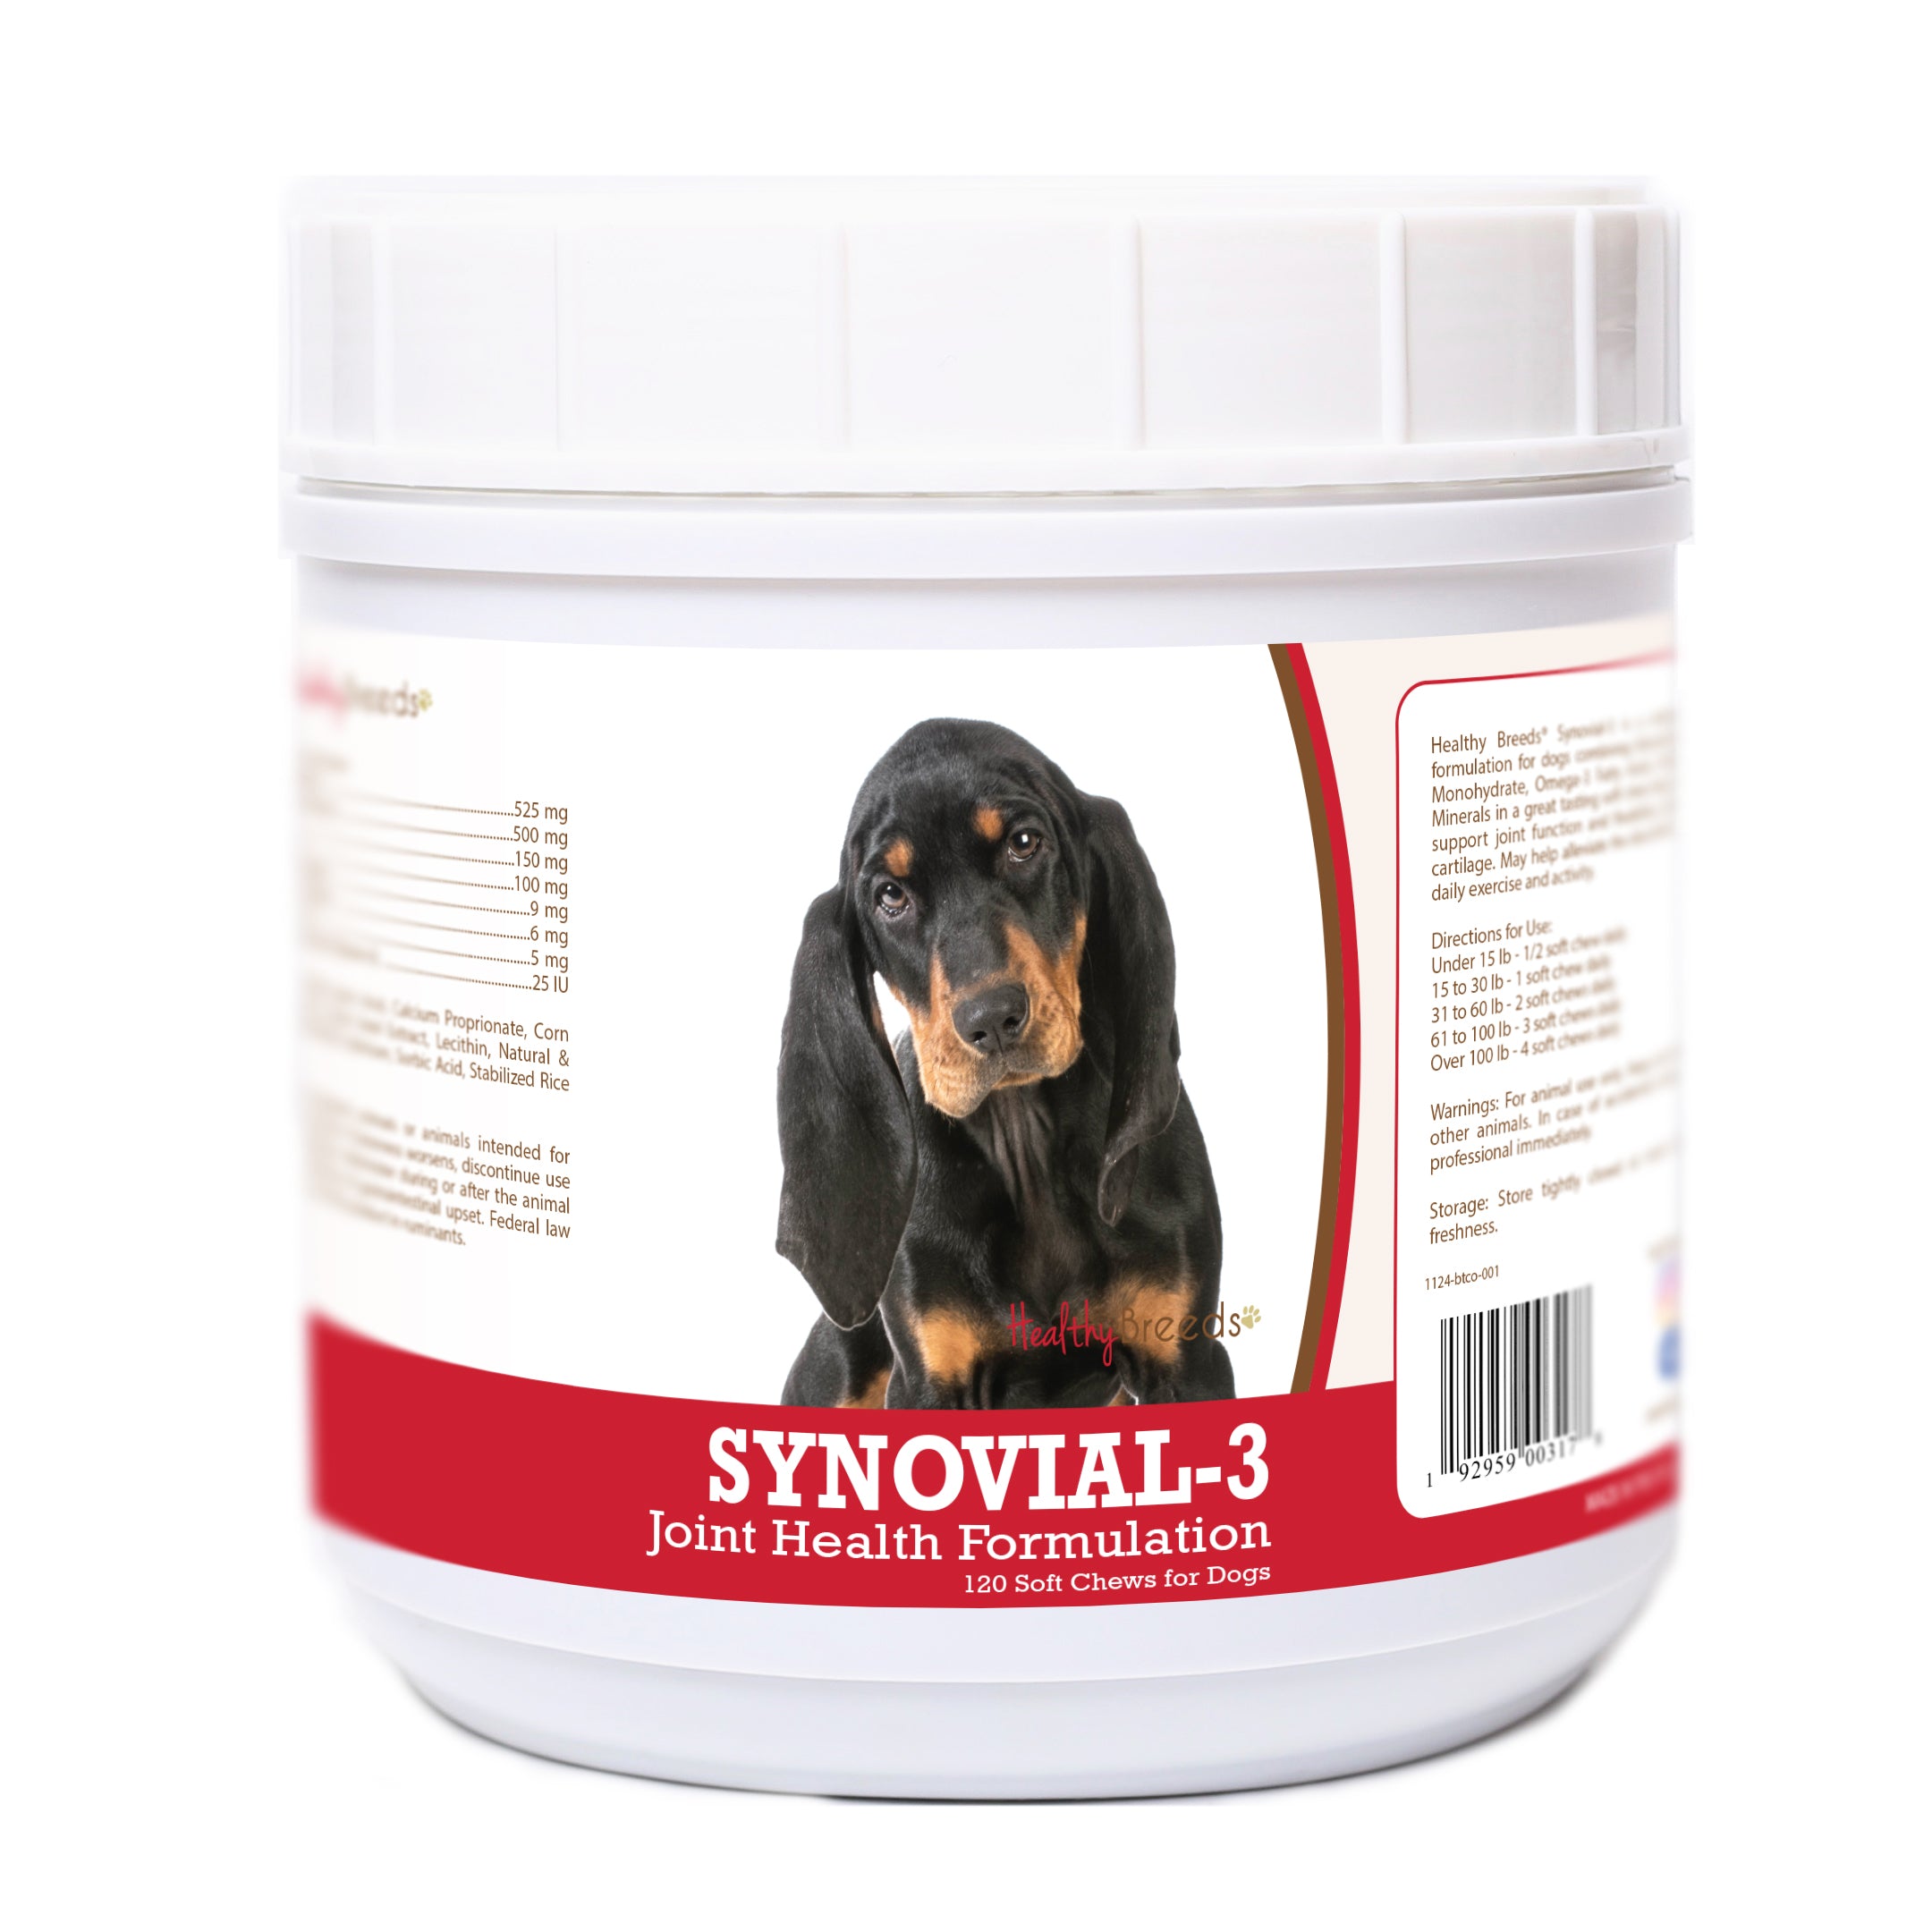 Black and Tan Coonhound Synovial-3 Joint Health Formulation Soft Chews 120 Count